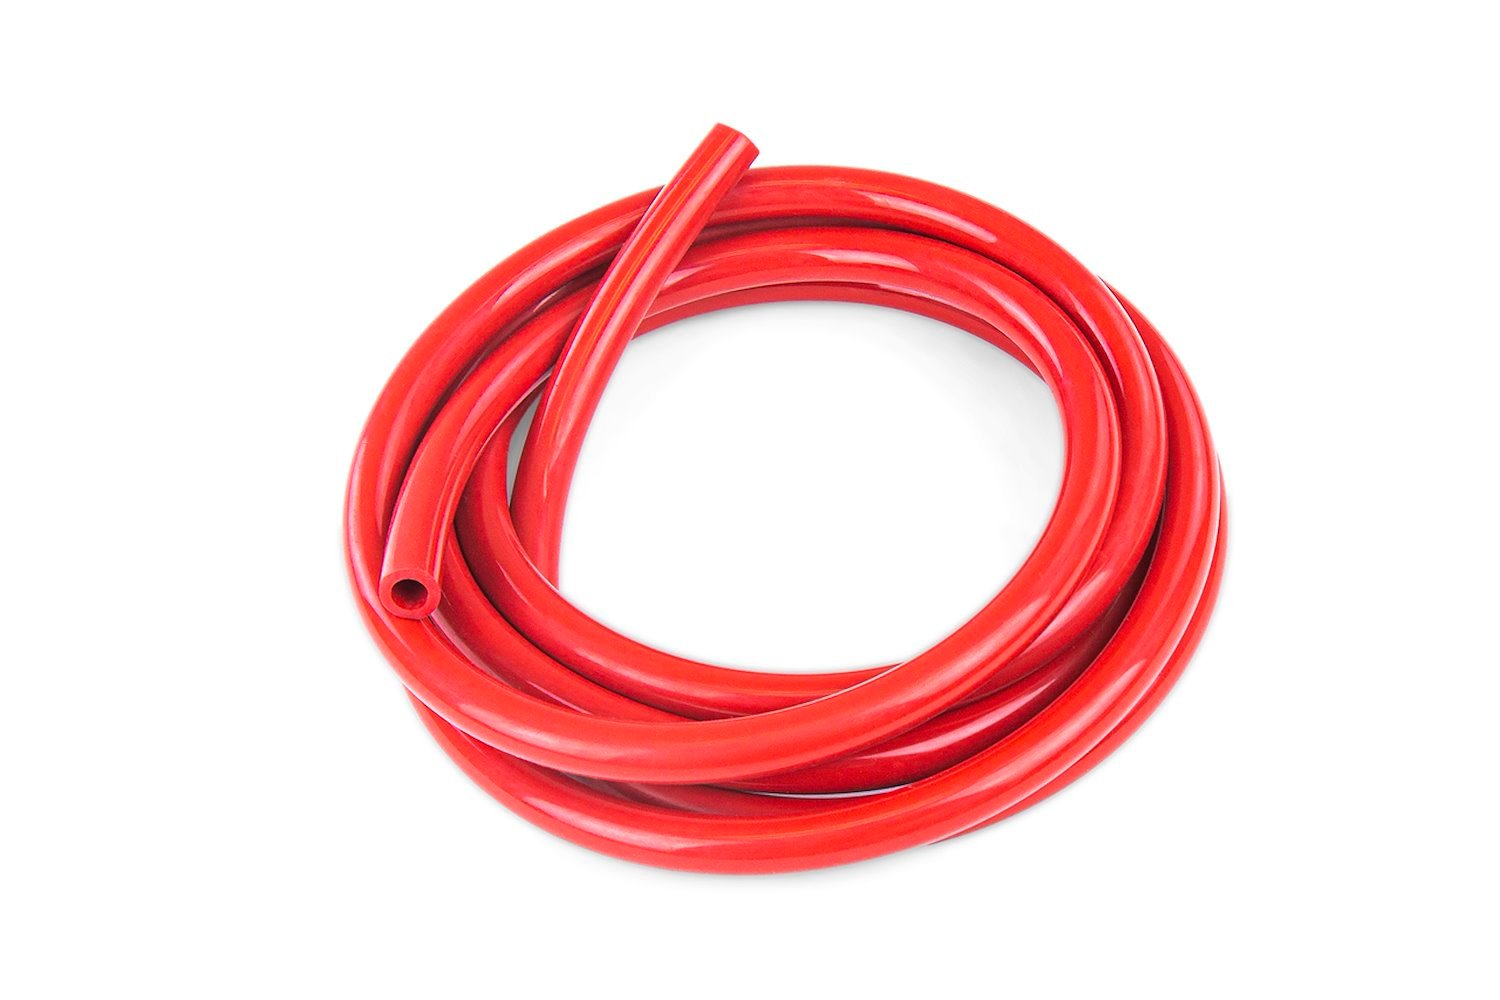 HTSVH95-REDx25 High-Temperature Silicone Vacuum Hose Tubing, 3/8 in. ID, 25 ft. Roll, Red